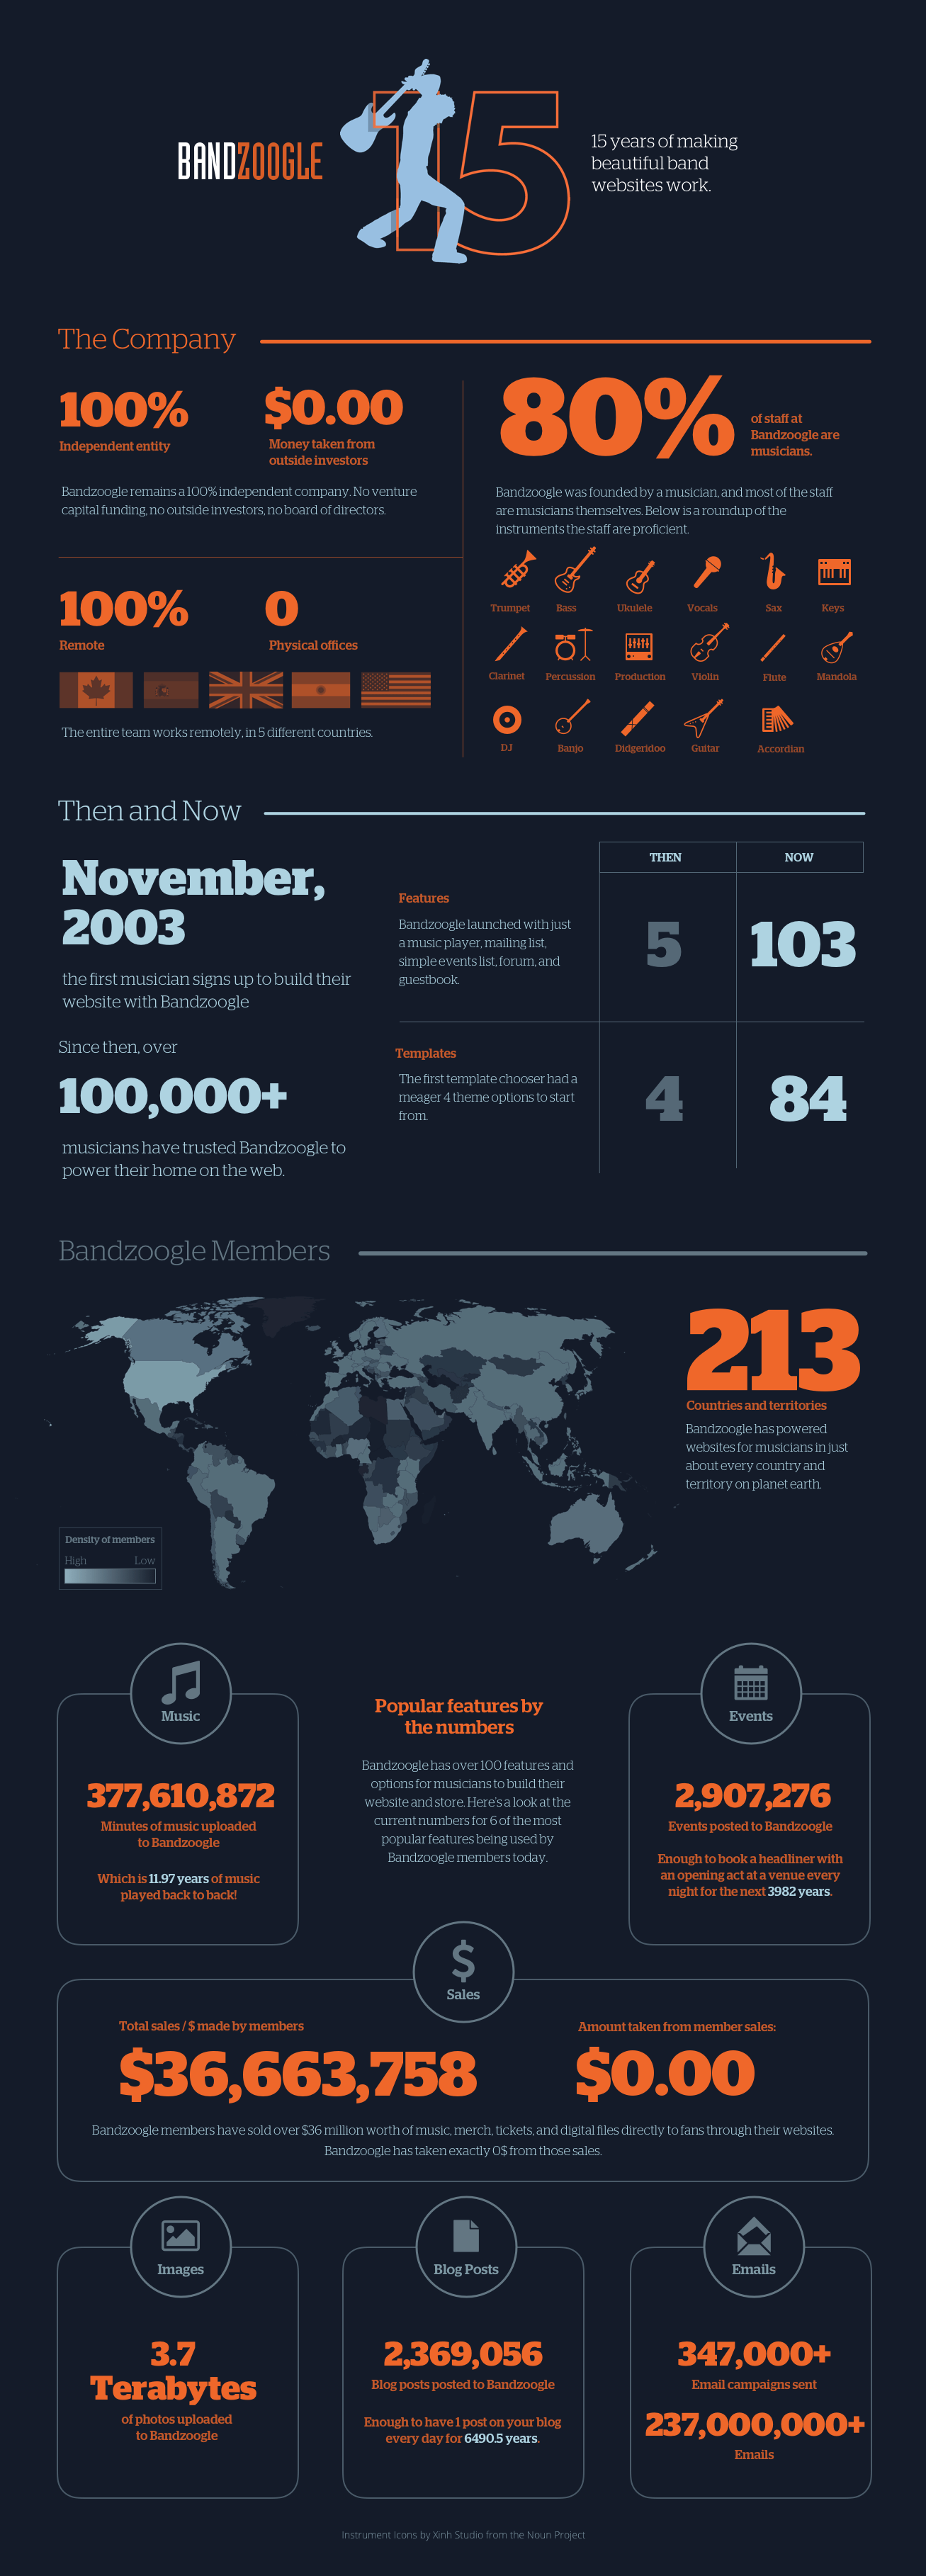 Infographic Bandzoogle by the Numbers: 15 Years of Making Beautiful Music Websites